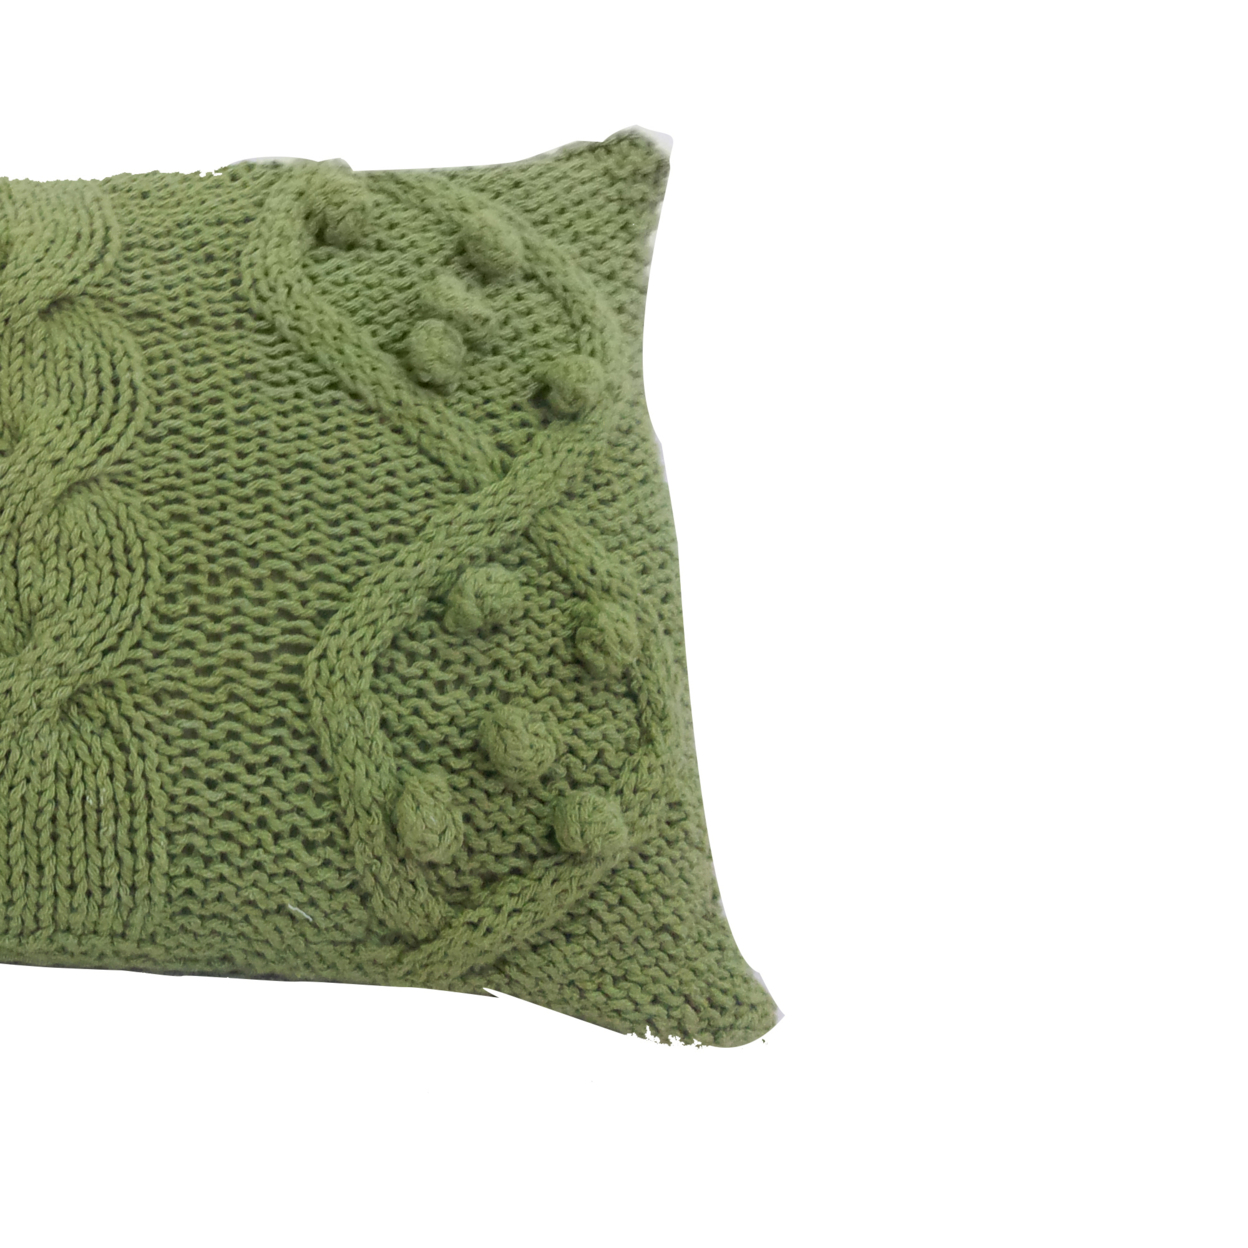 20 X 14 Inch Cotton Cable Knit Pillow With Twisted Details, Set Of 2, Green- Saltoro Sherpi